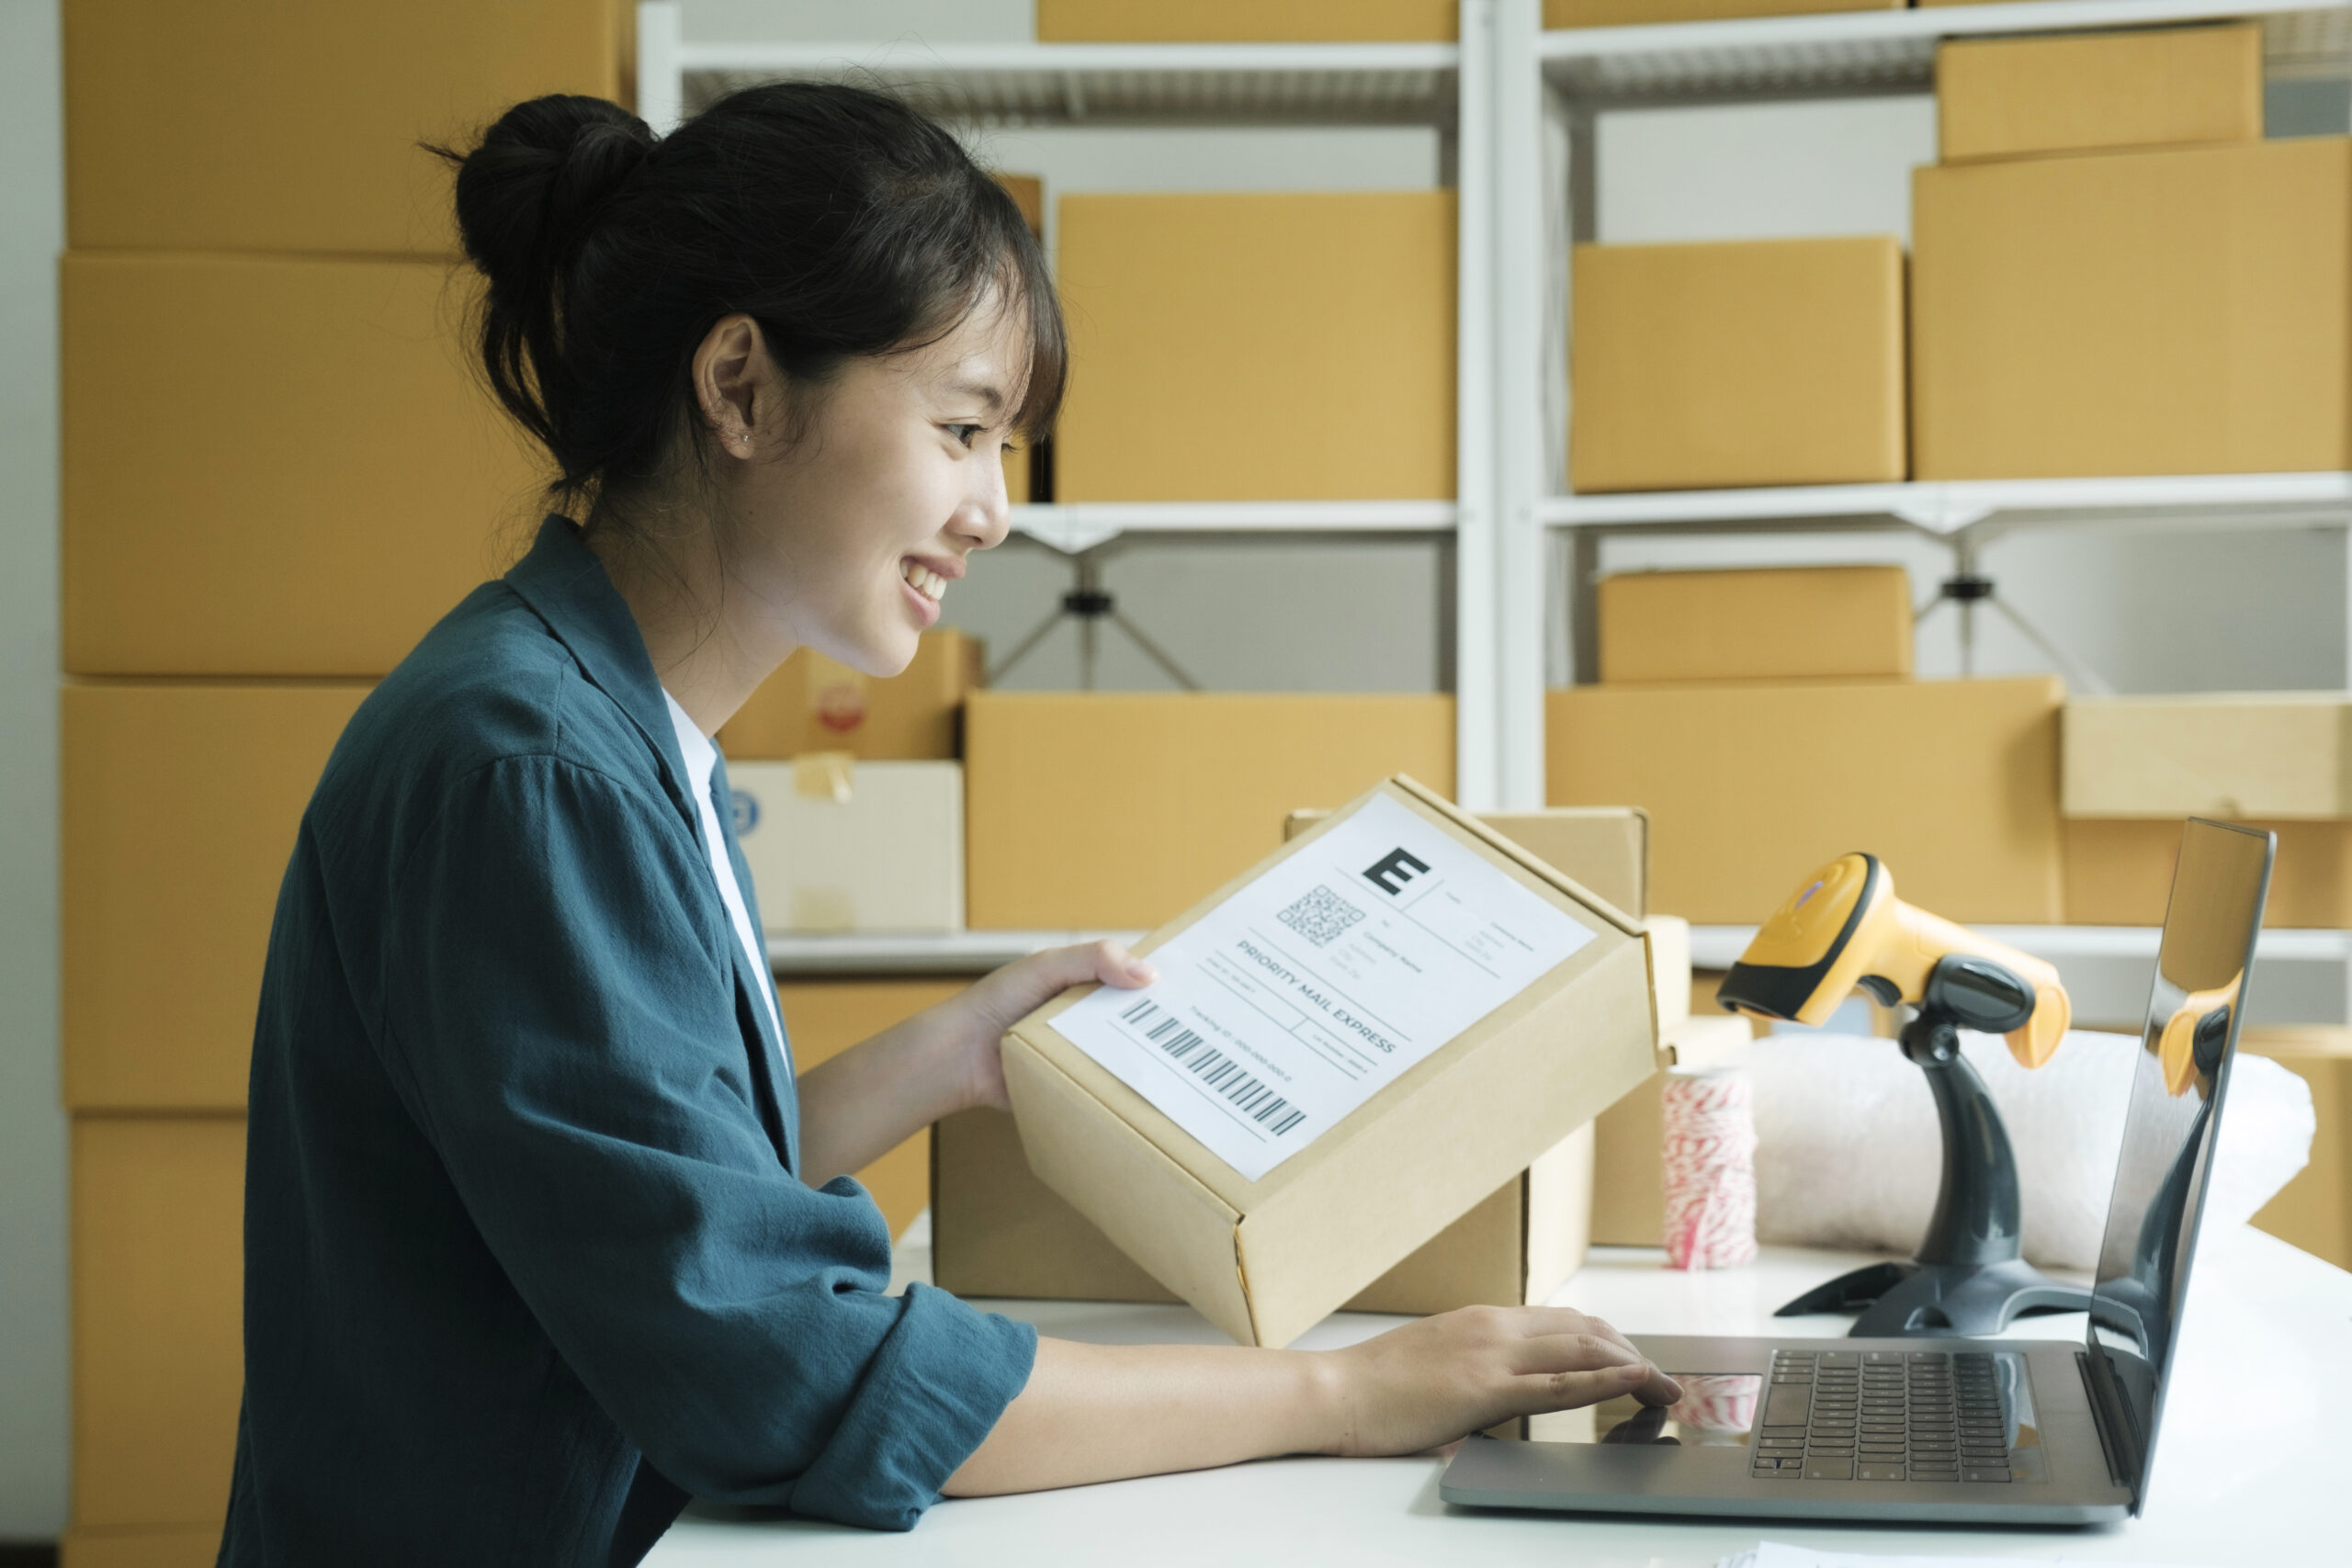 Young female small business entrepreneur, online store owner holding parcel checking address before delivery and shipping to customer using laptop at warehouse, workplace. Online selling, e-commerce conept.